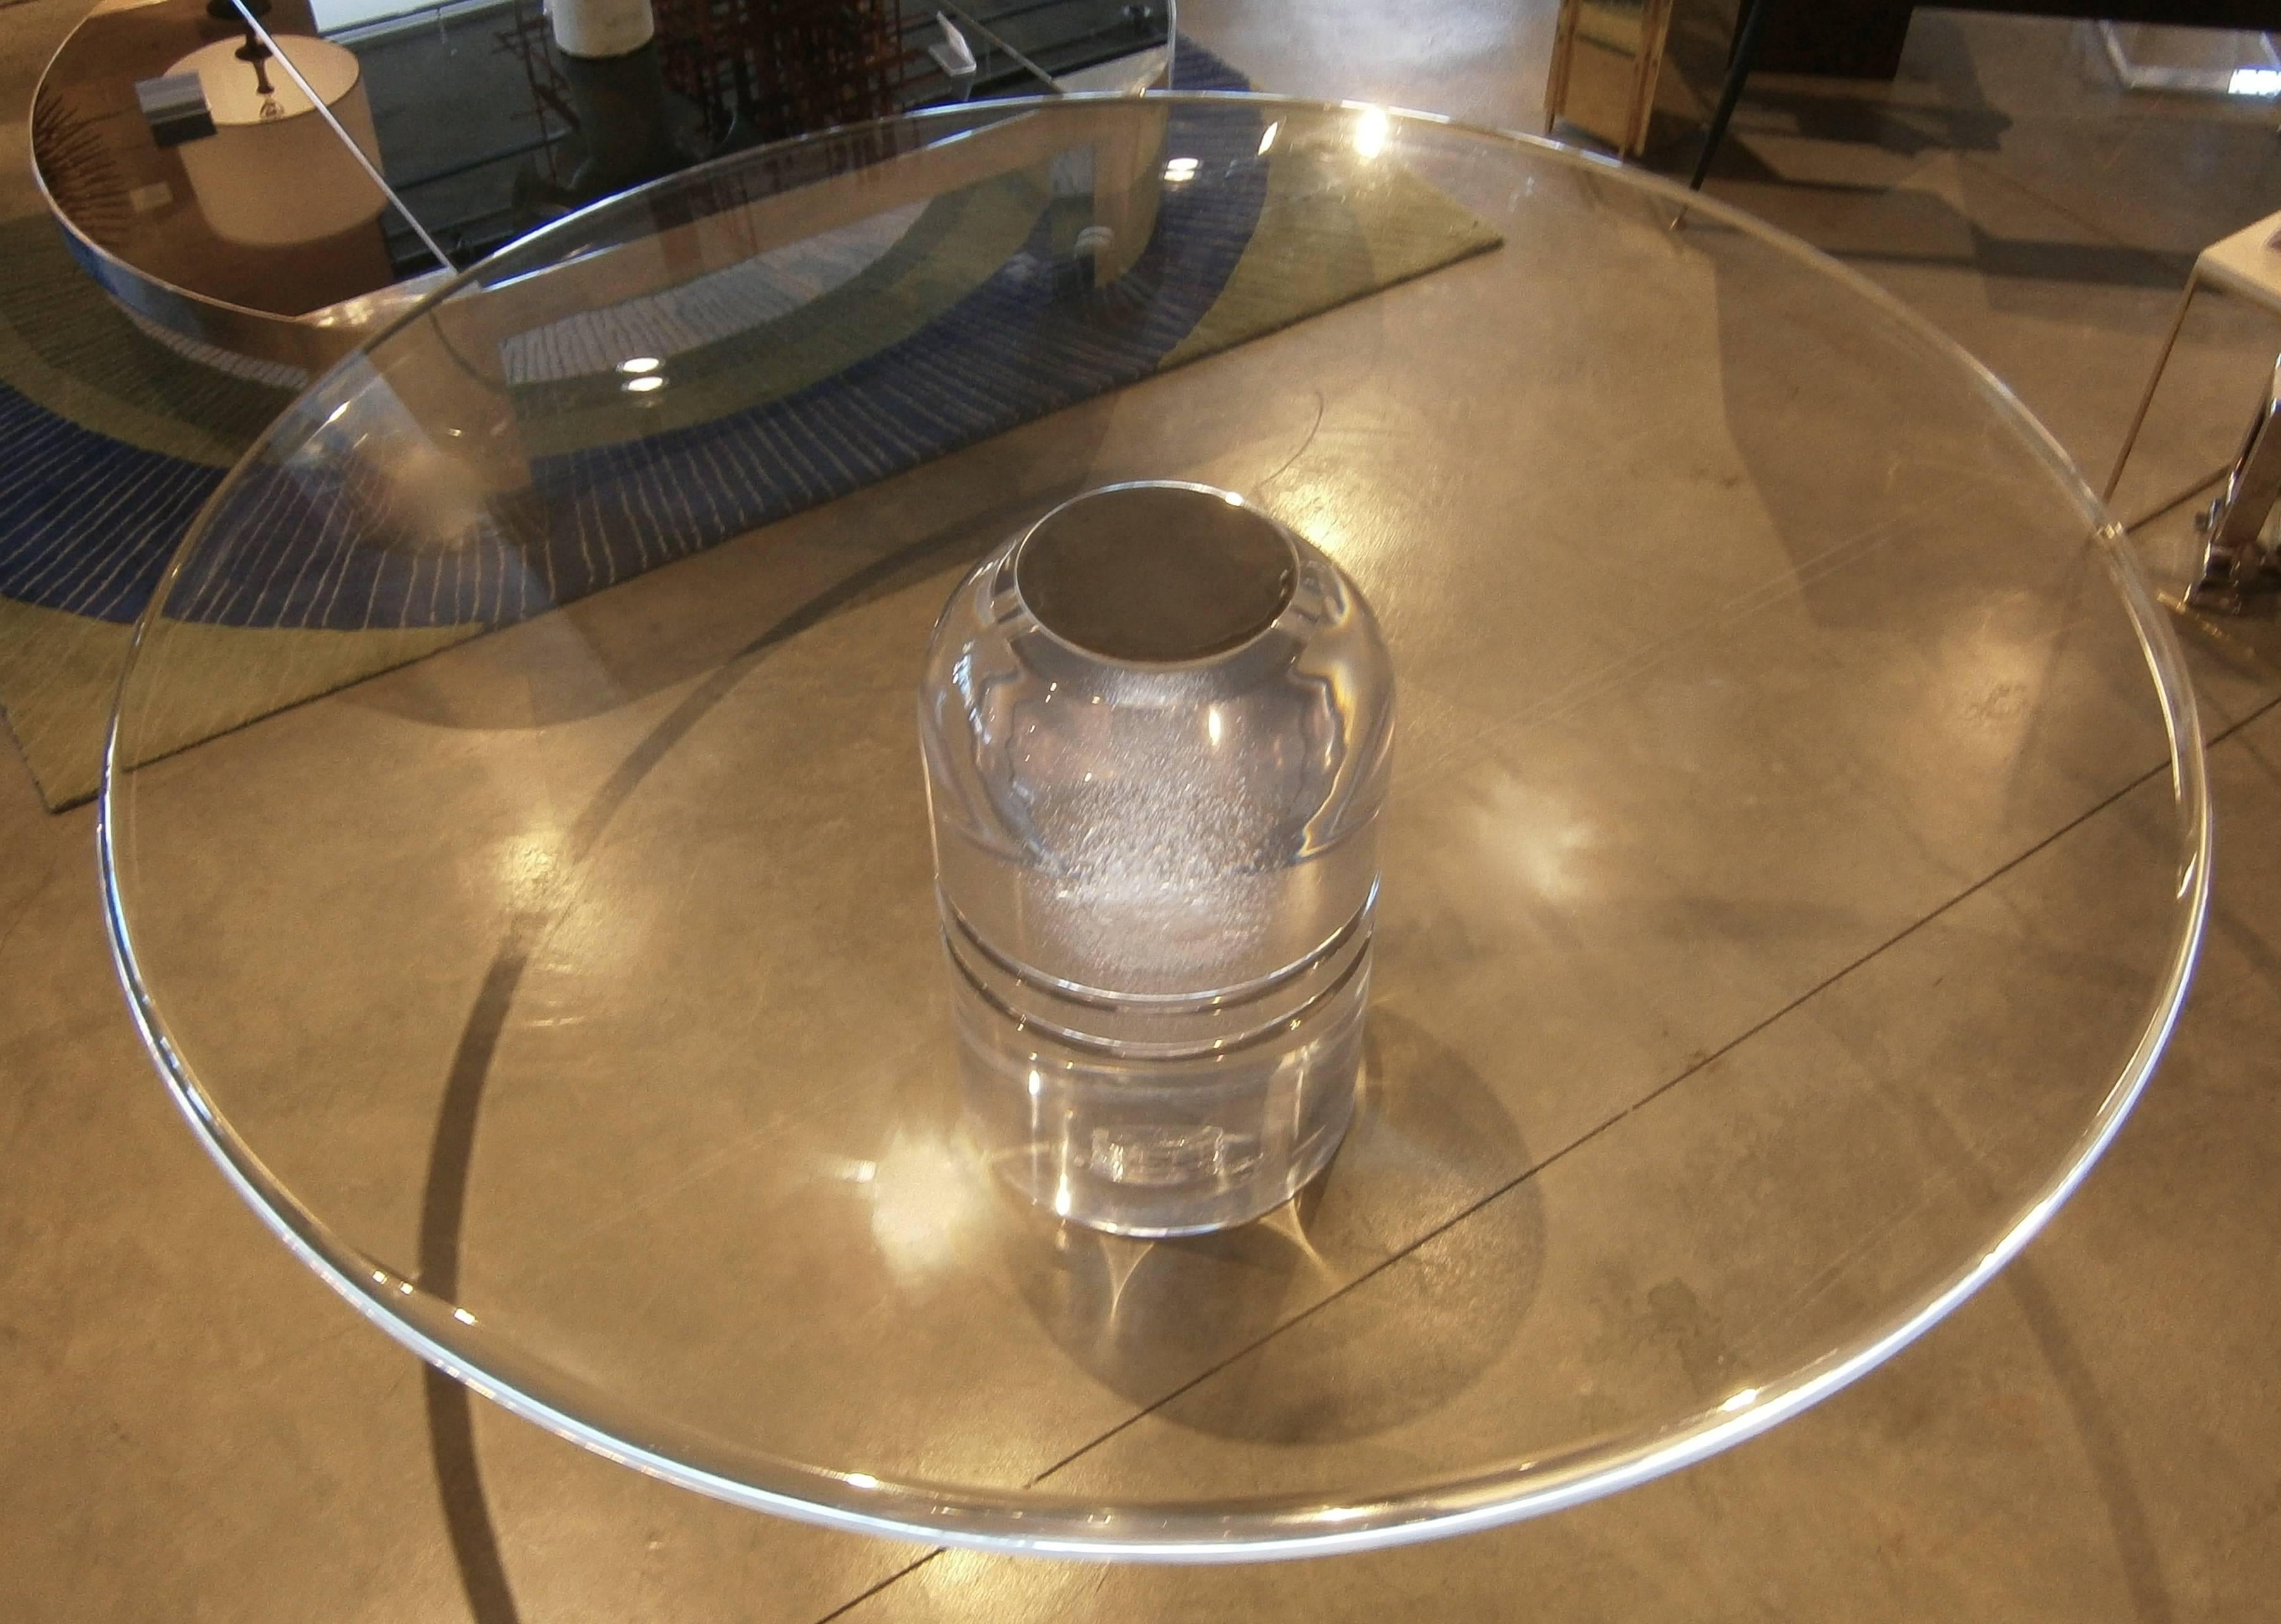 An exceptional custom-made Lucite and nickel plated metal Le Dome dining table by the legendary King of Lucite, Charles Hollis Jones. Mr. Jones designed the Le Dome table in the 1970s for Swedlow Plastics and this is a unique contemporary reissue of